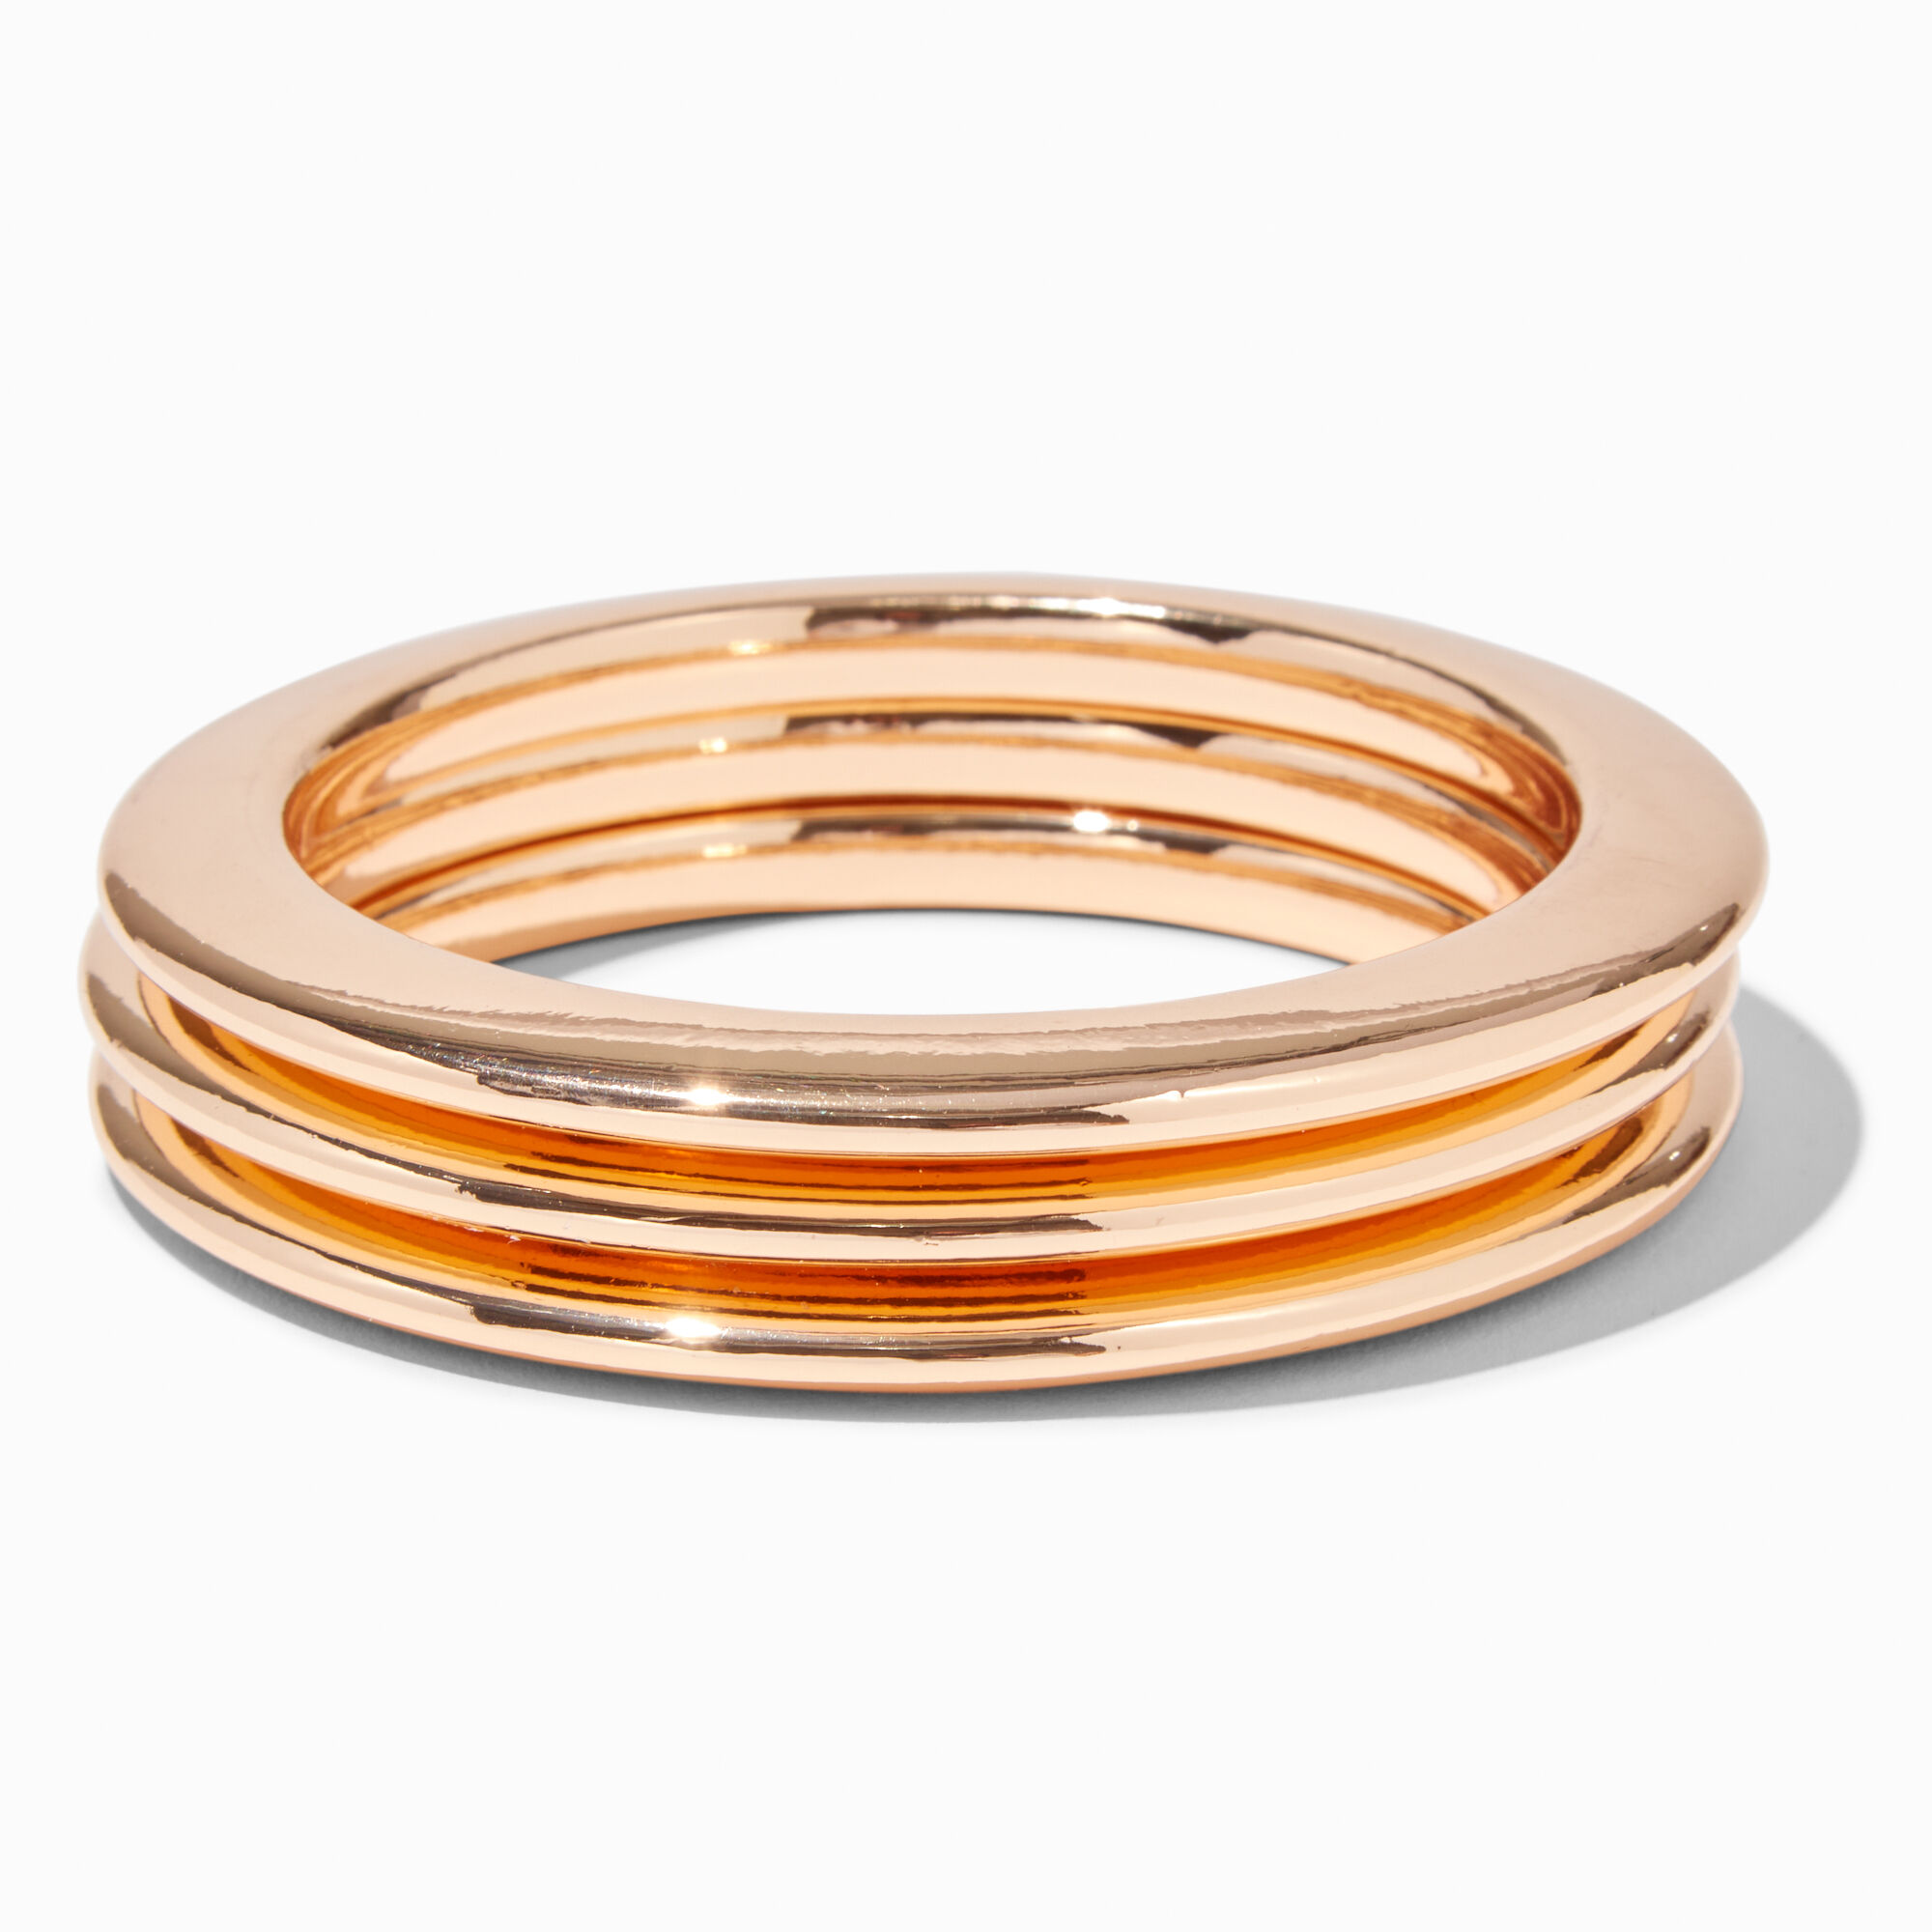 View Claires Shiny Tone Bangle Bracelets 3 Pack Gold information